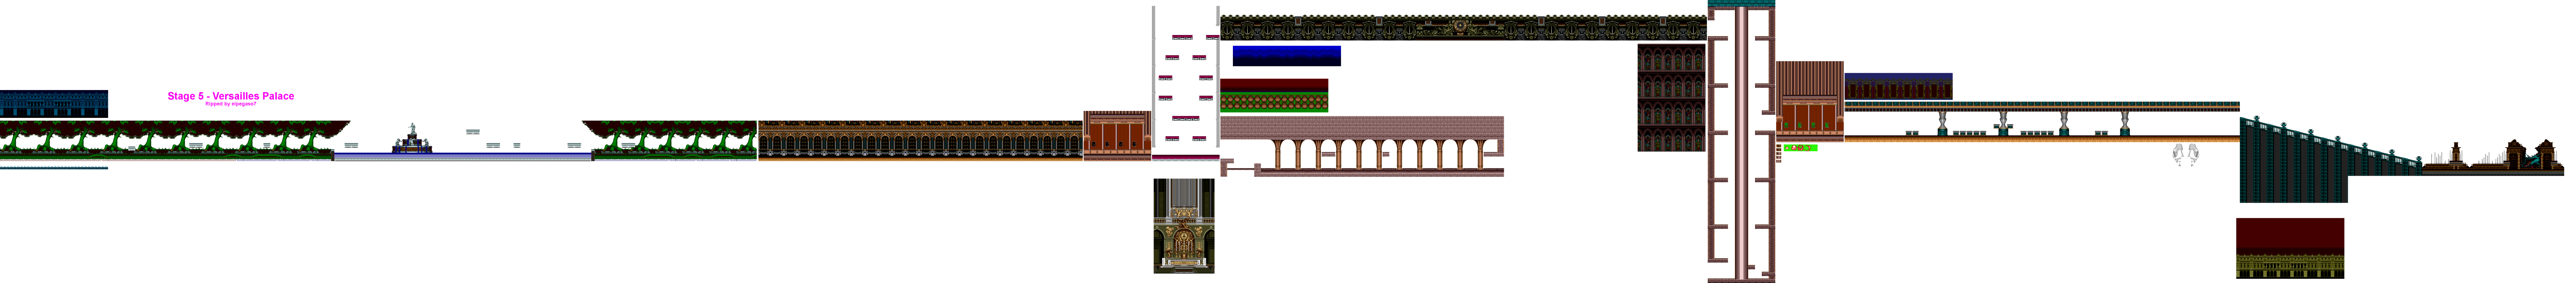 Castlevania: Bloodlines - Stage 5 - Versailles Palace